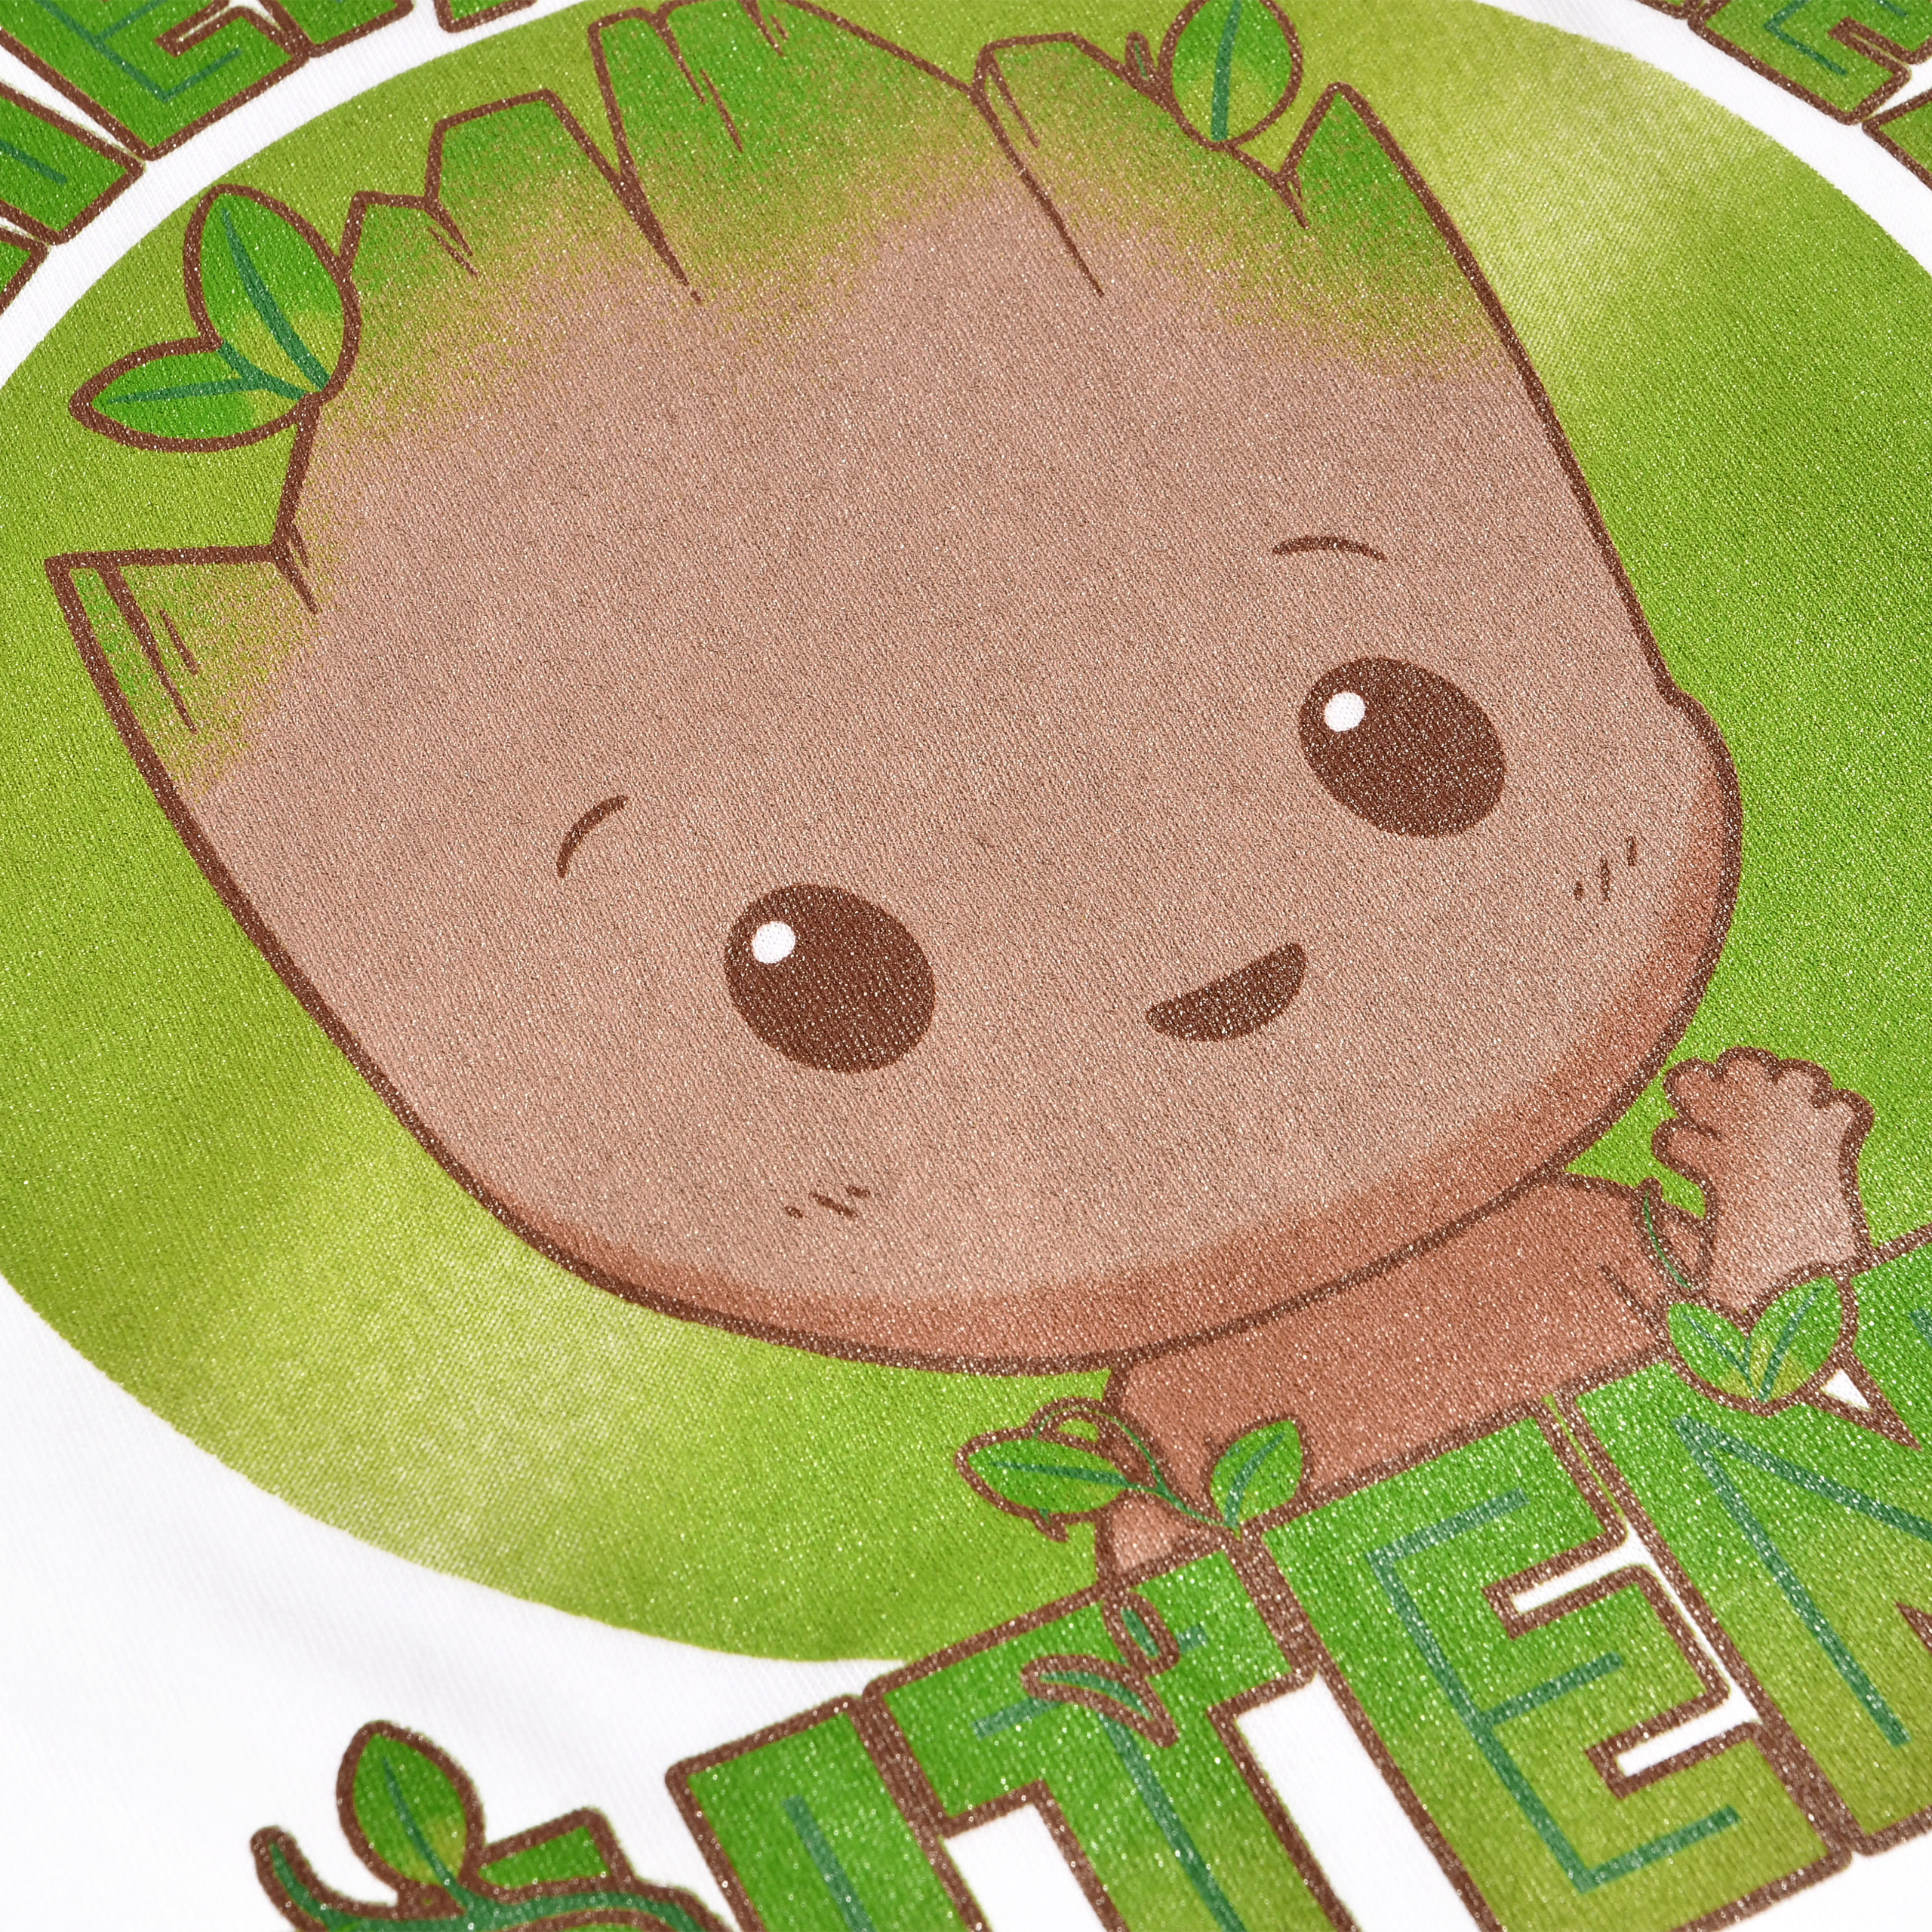 Guardians of the Galaxy - Groot Cuteness Dames Losse Pasvorm T-shirt Wit